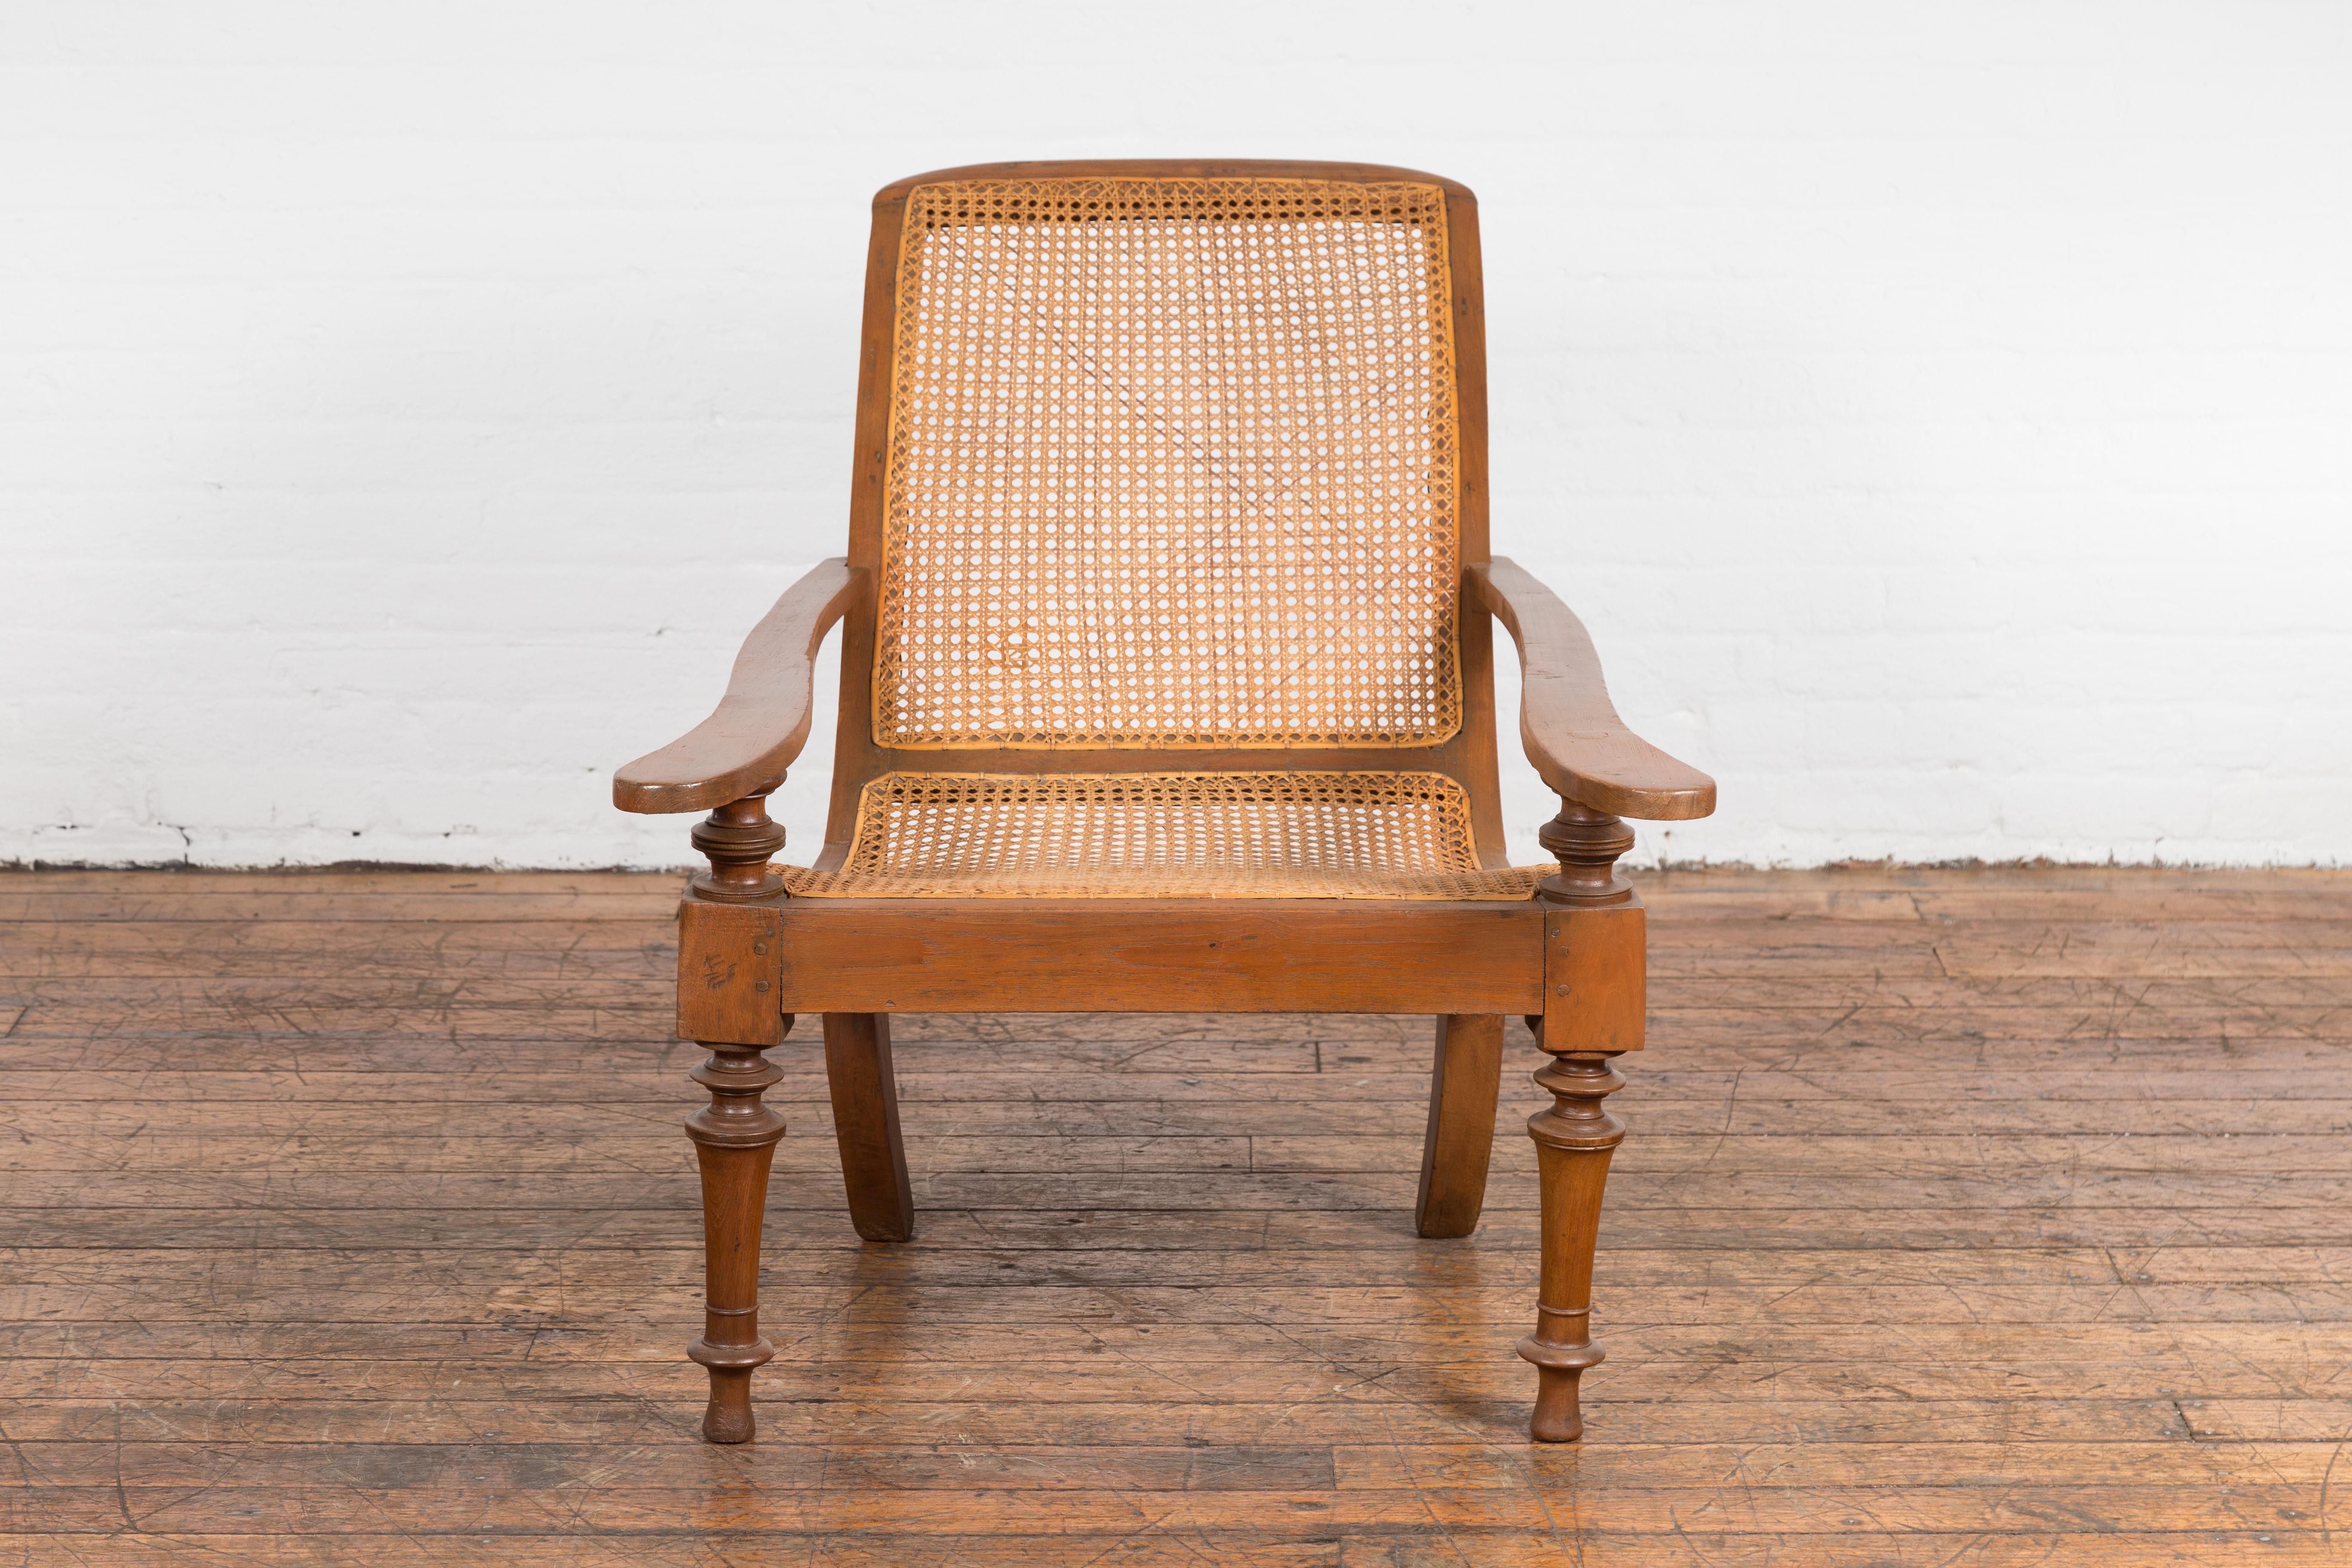 An antique Dutch Colonial Indonesian cane and wood plantation chair from the 20th century with extending arms and turned baluster legs. Enhance your living space with the charm and exotic allure of this antique Dutch Colonial Indonesian plantation